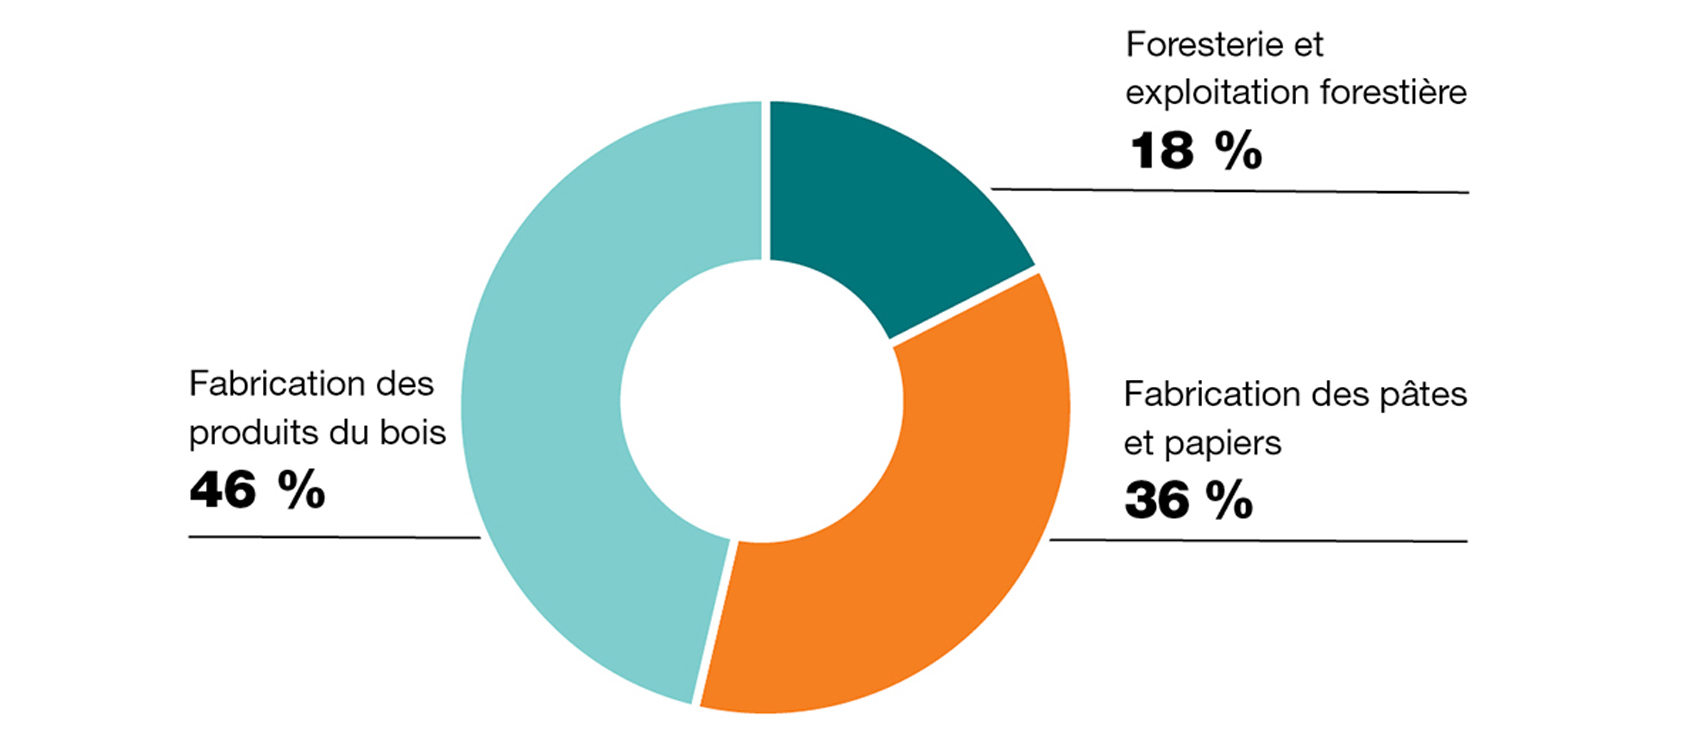 Forest industry graph